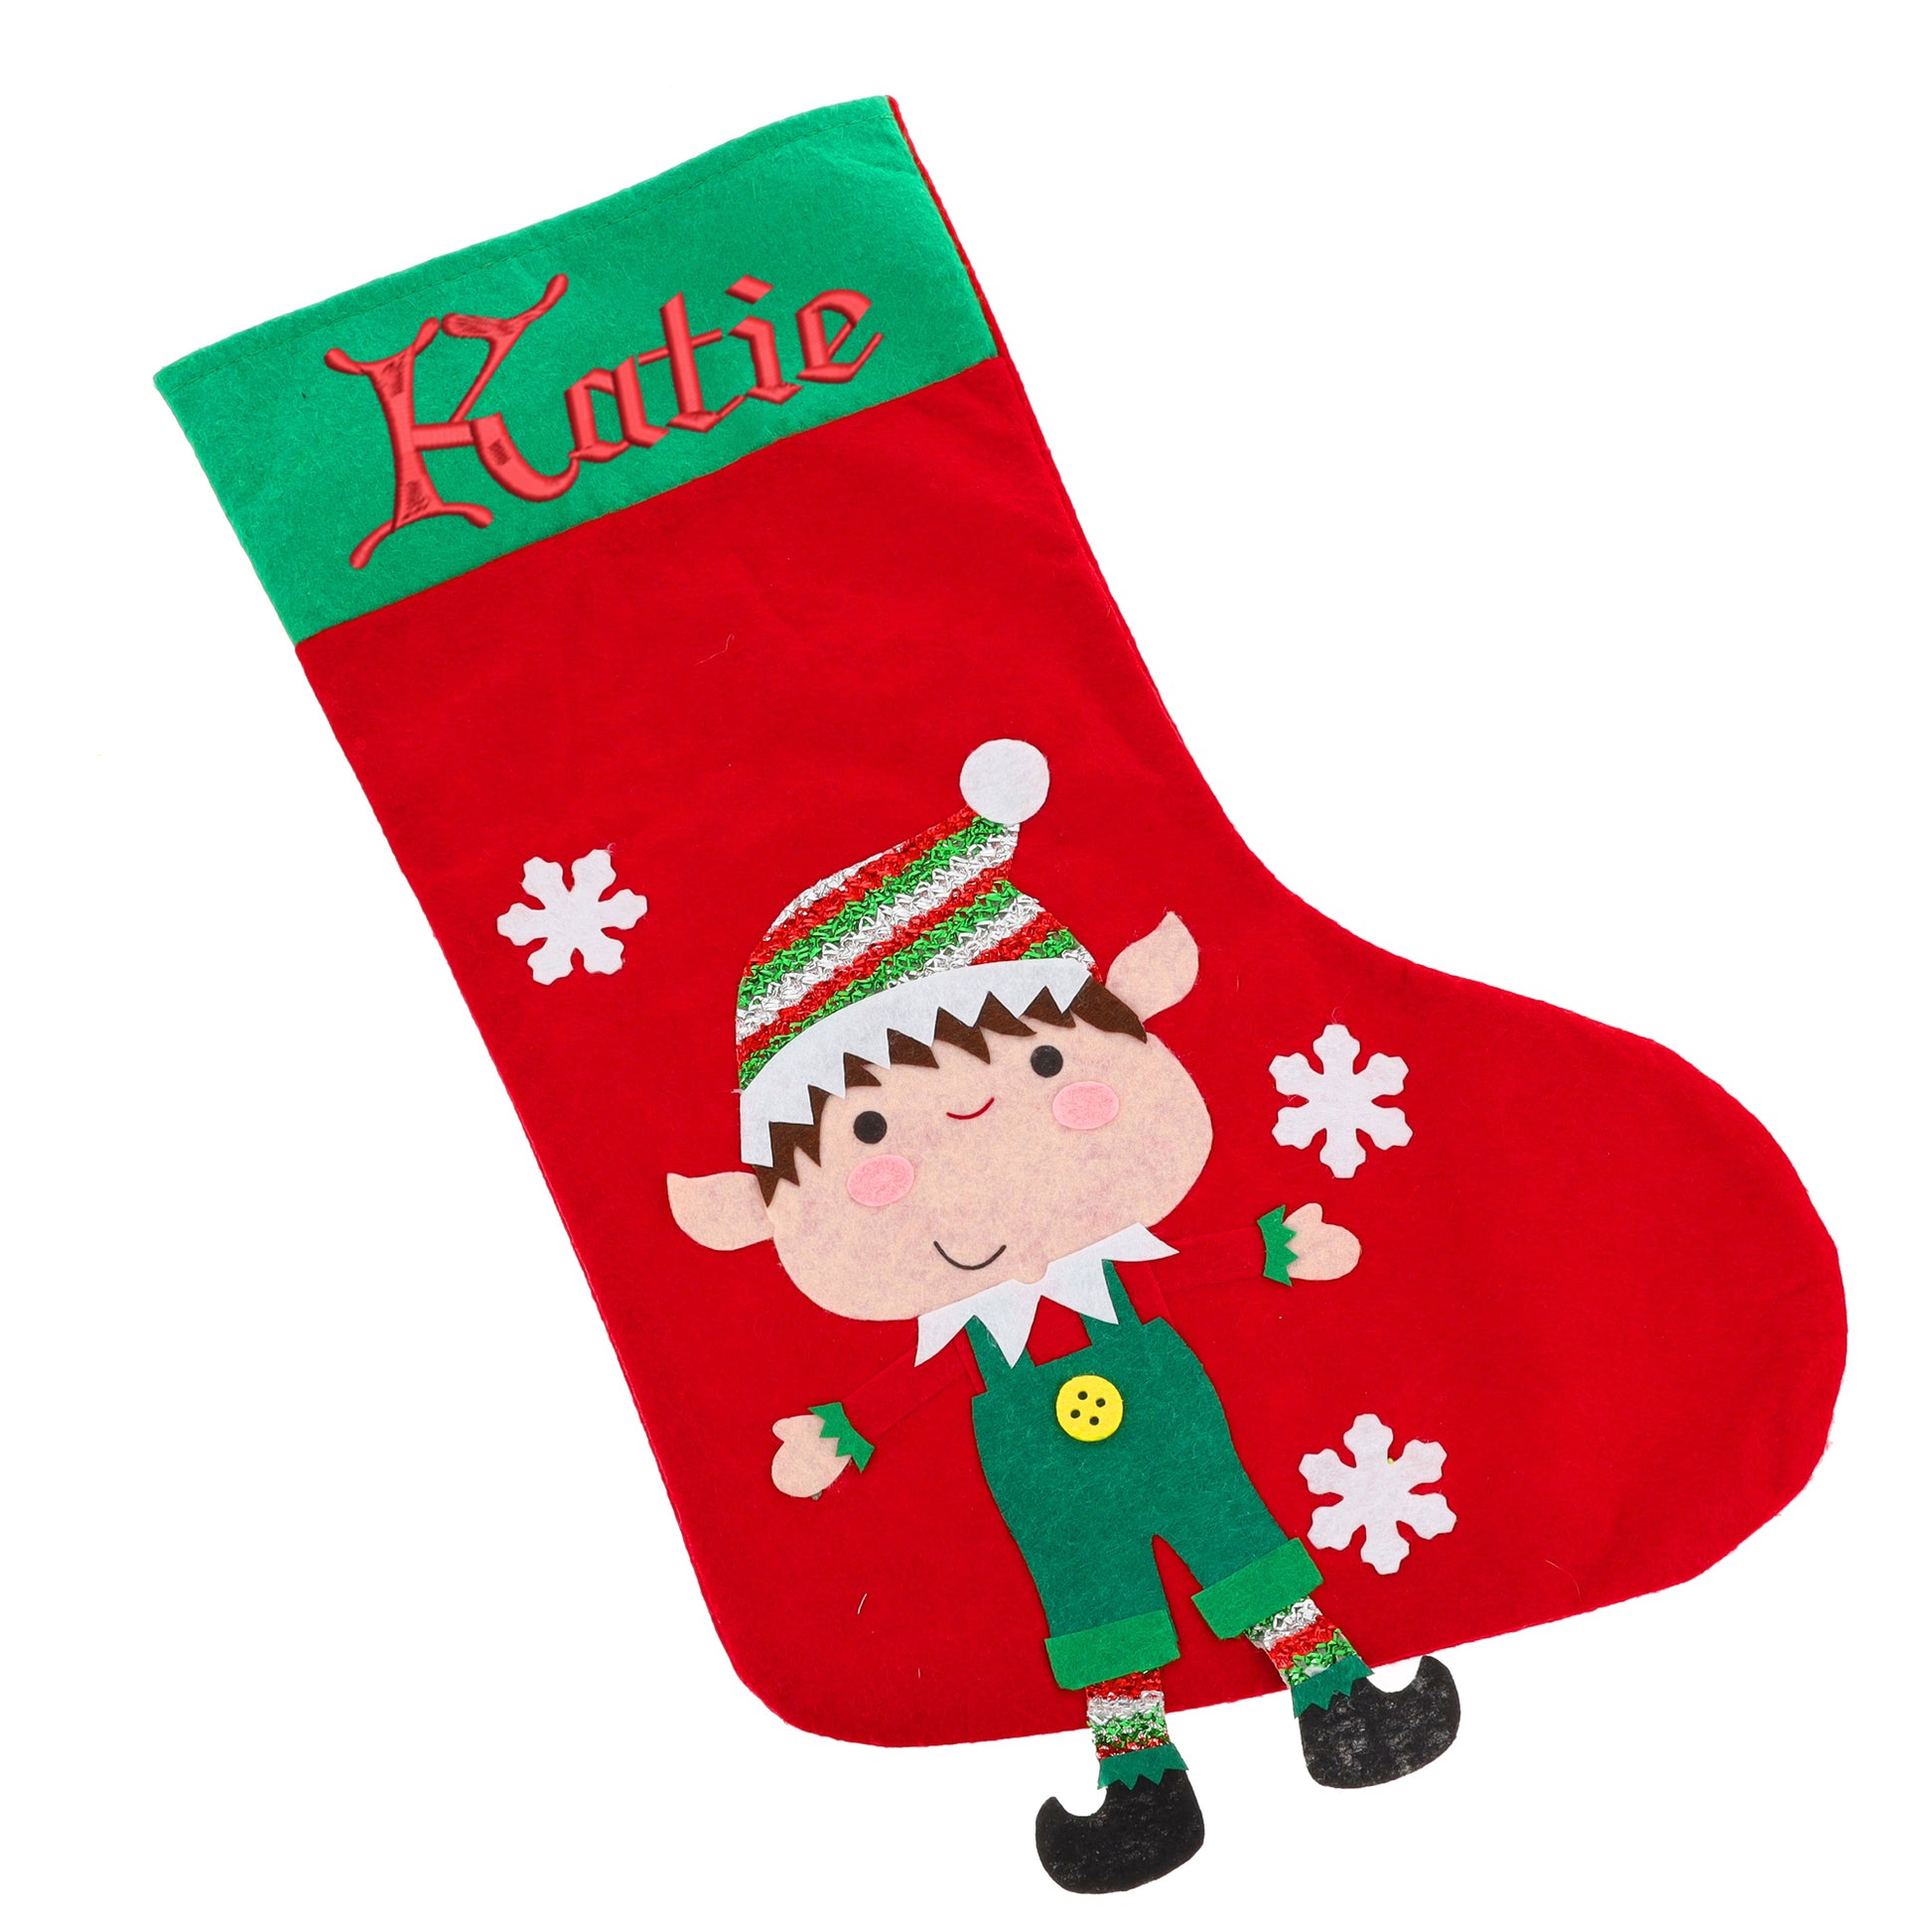 Embroidered Personalised Christmas Stocking With Santa Or Elf Design  - Always Looking Good - Elf  